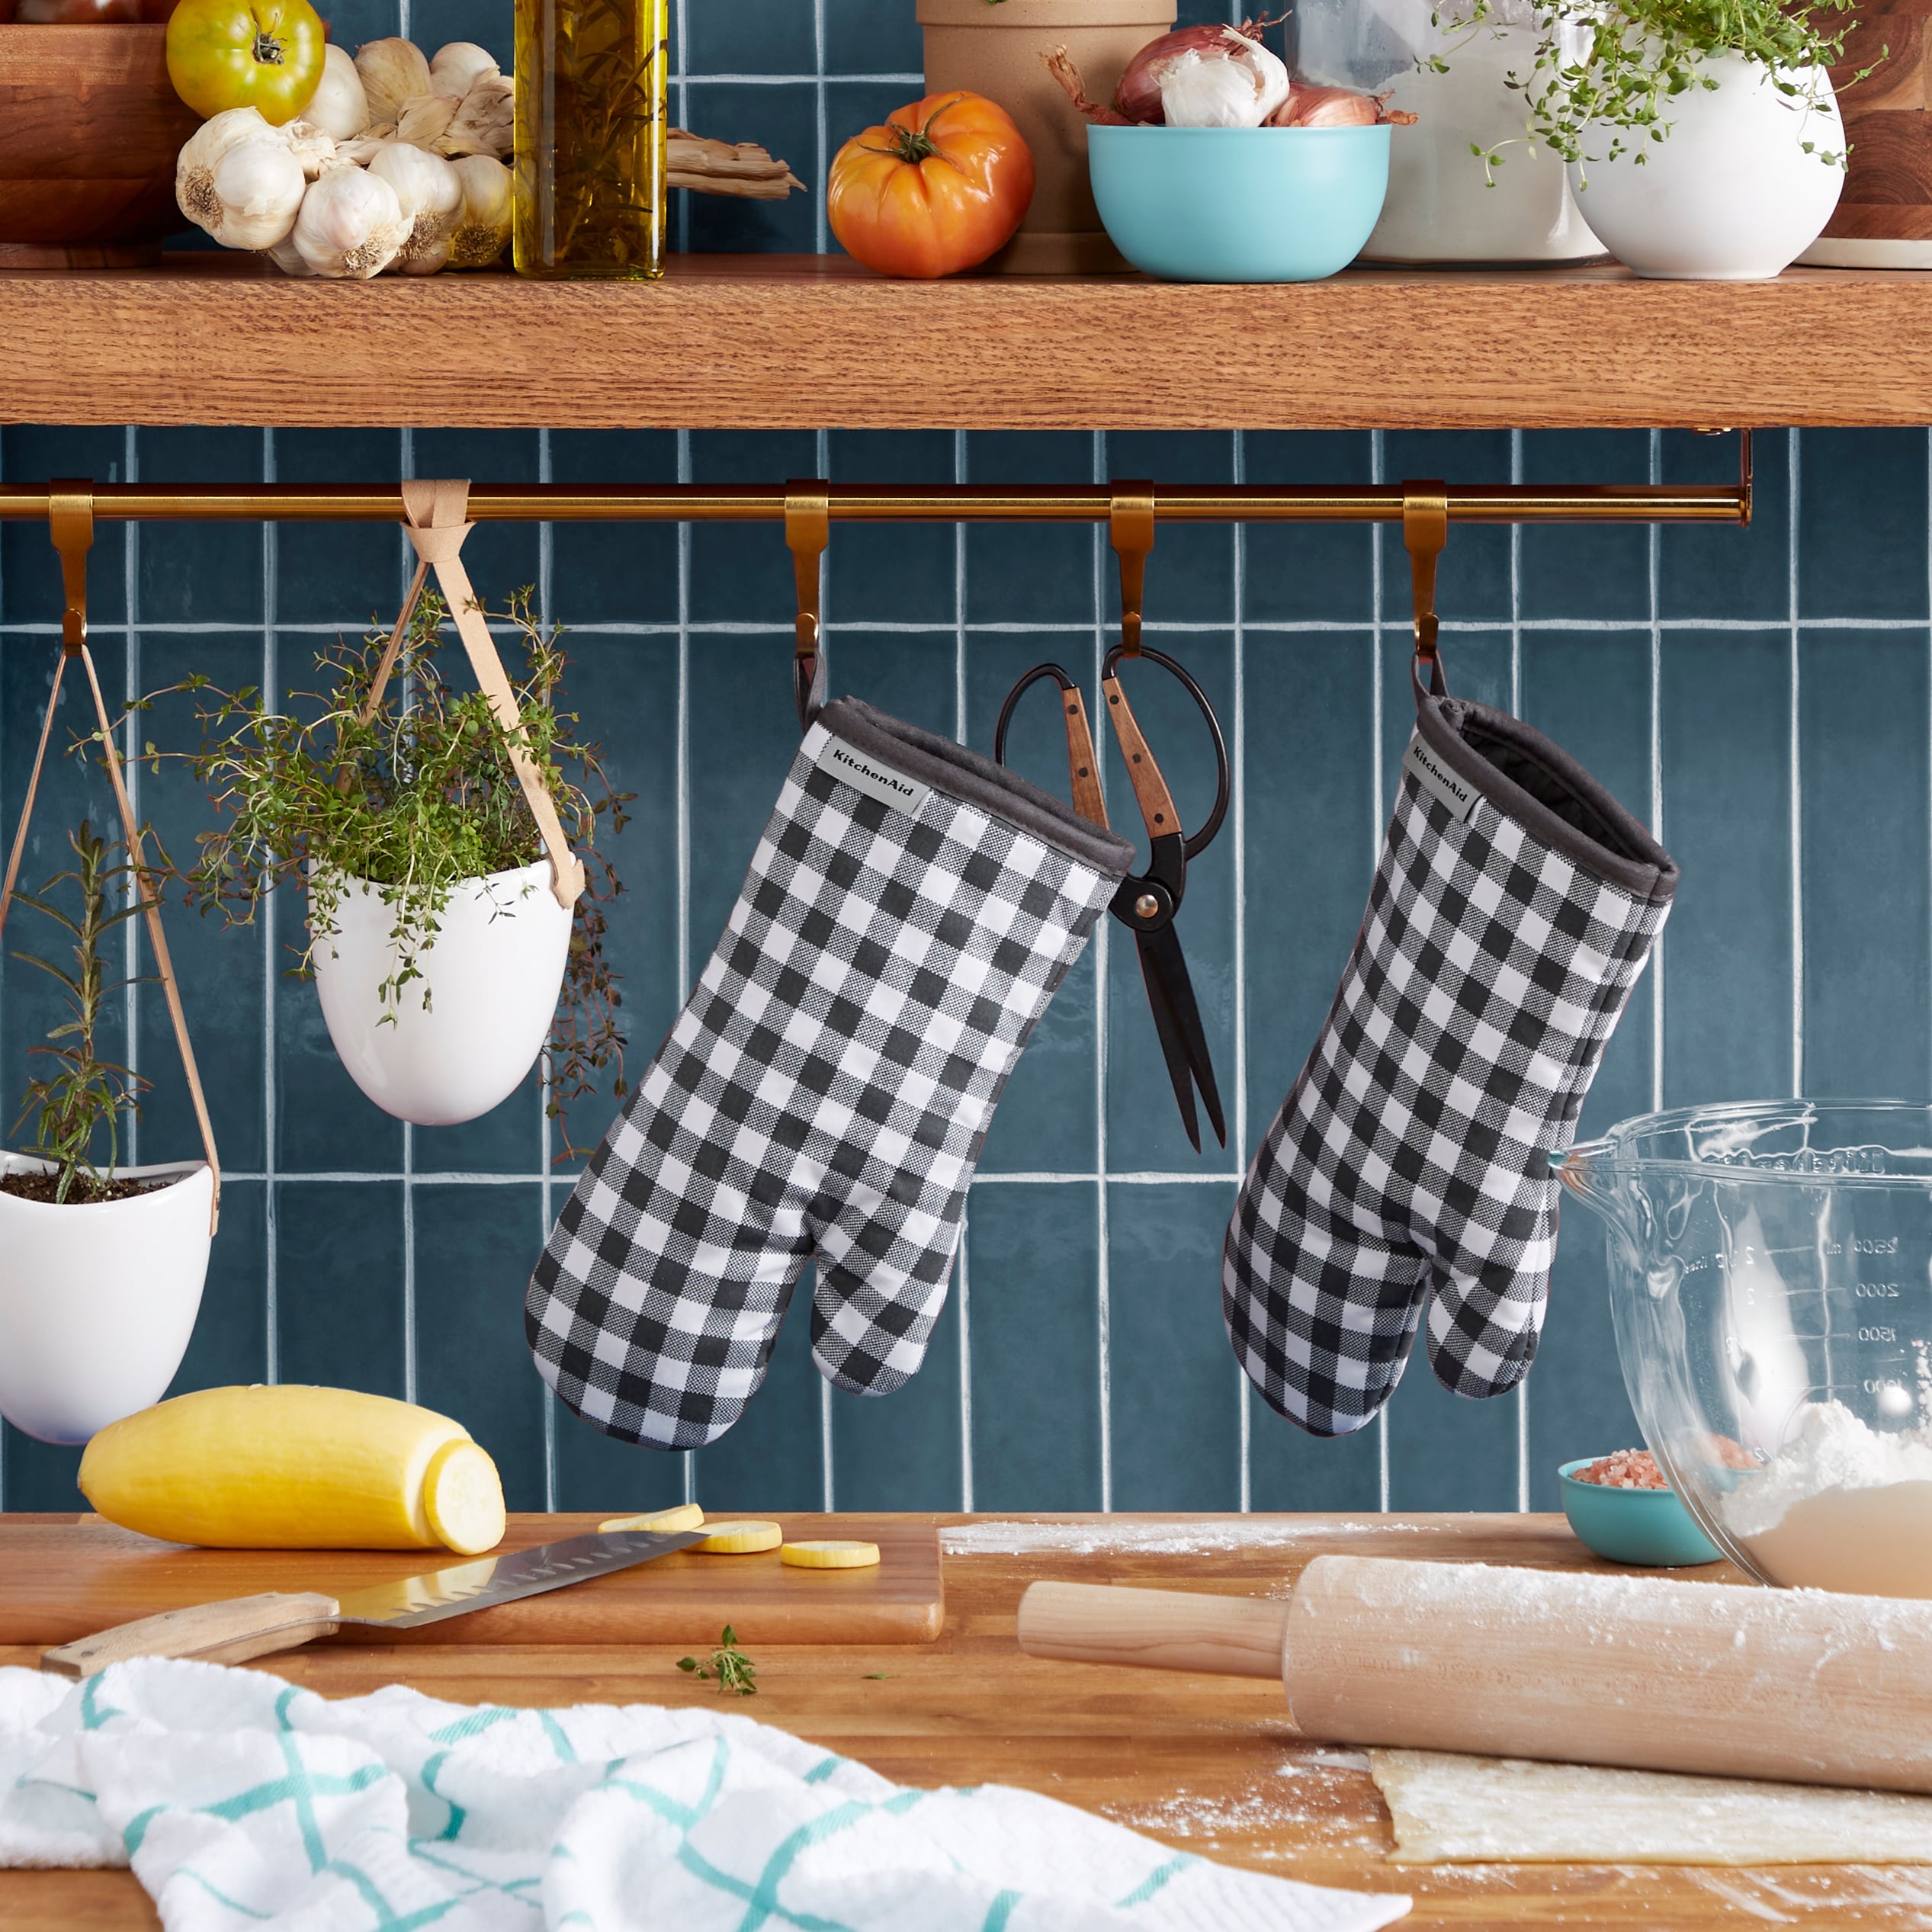 https://ak1.ostkcdn.com/images/products/is/images/direct/9bdde08e8a5ee6ff6859ac2eb8a0e584e5446108/KitchenAid-Gingham-Oven-Mitt-2-Pack-Set.jpg